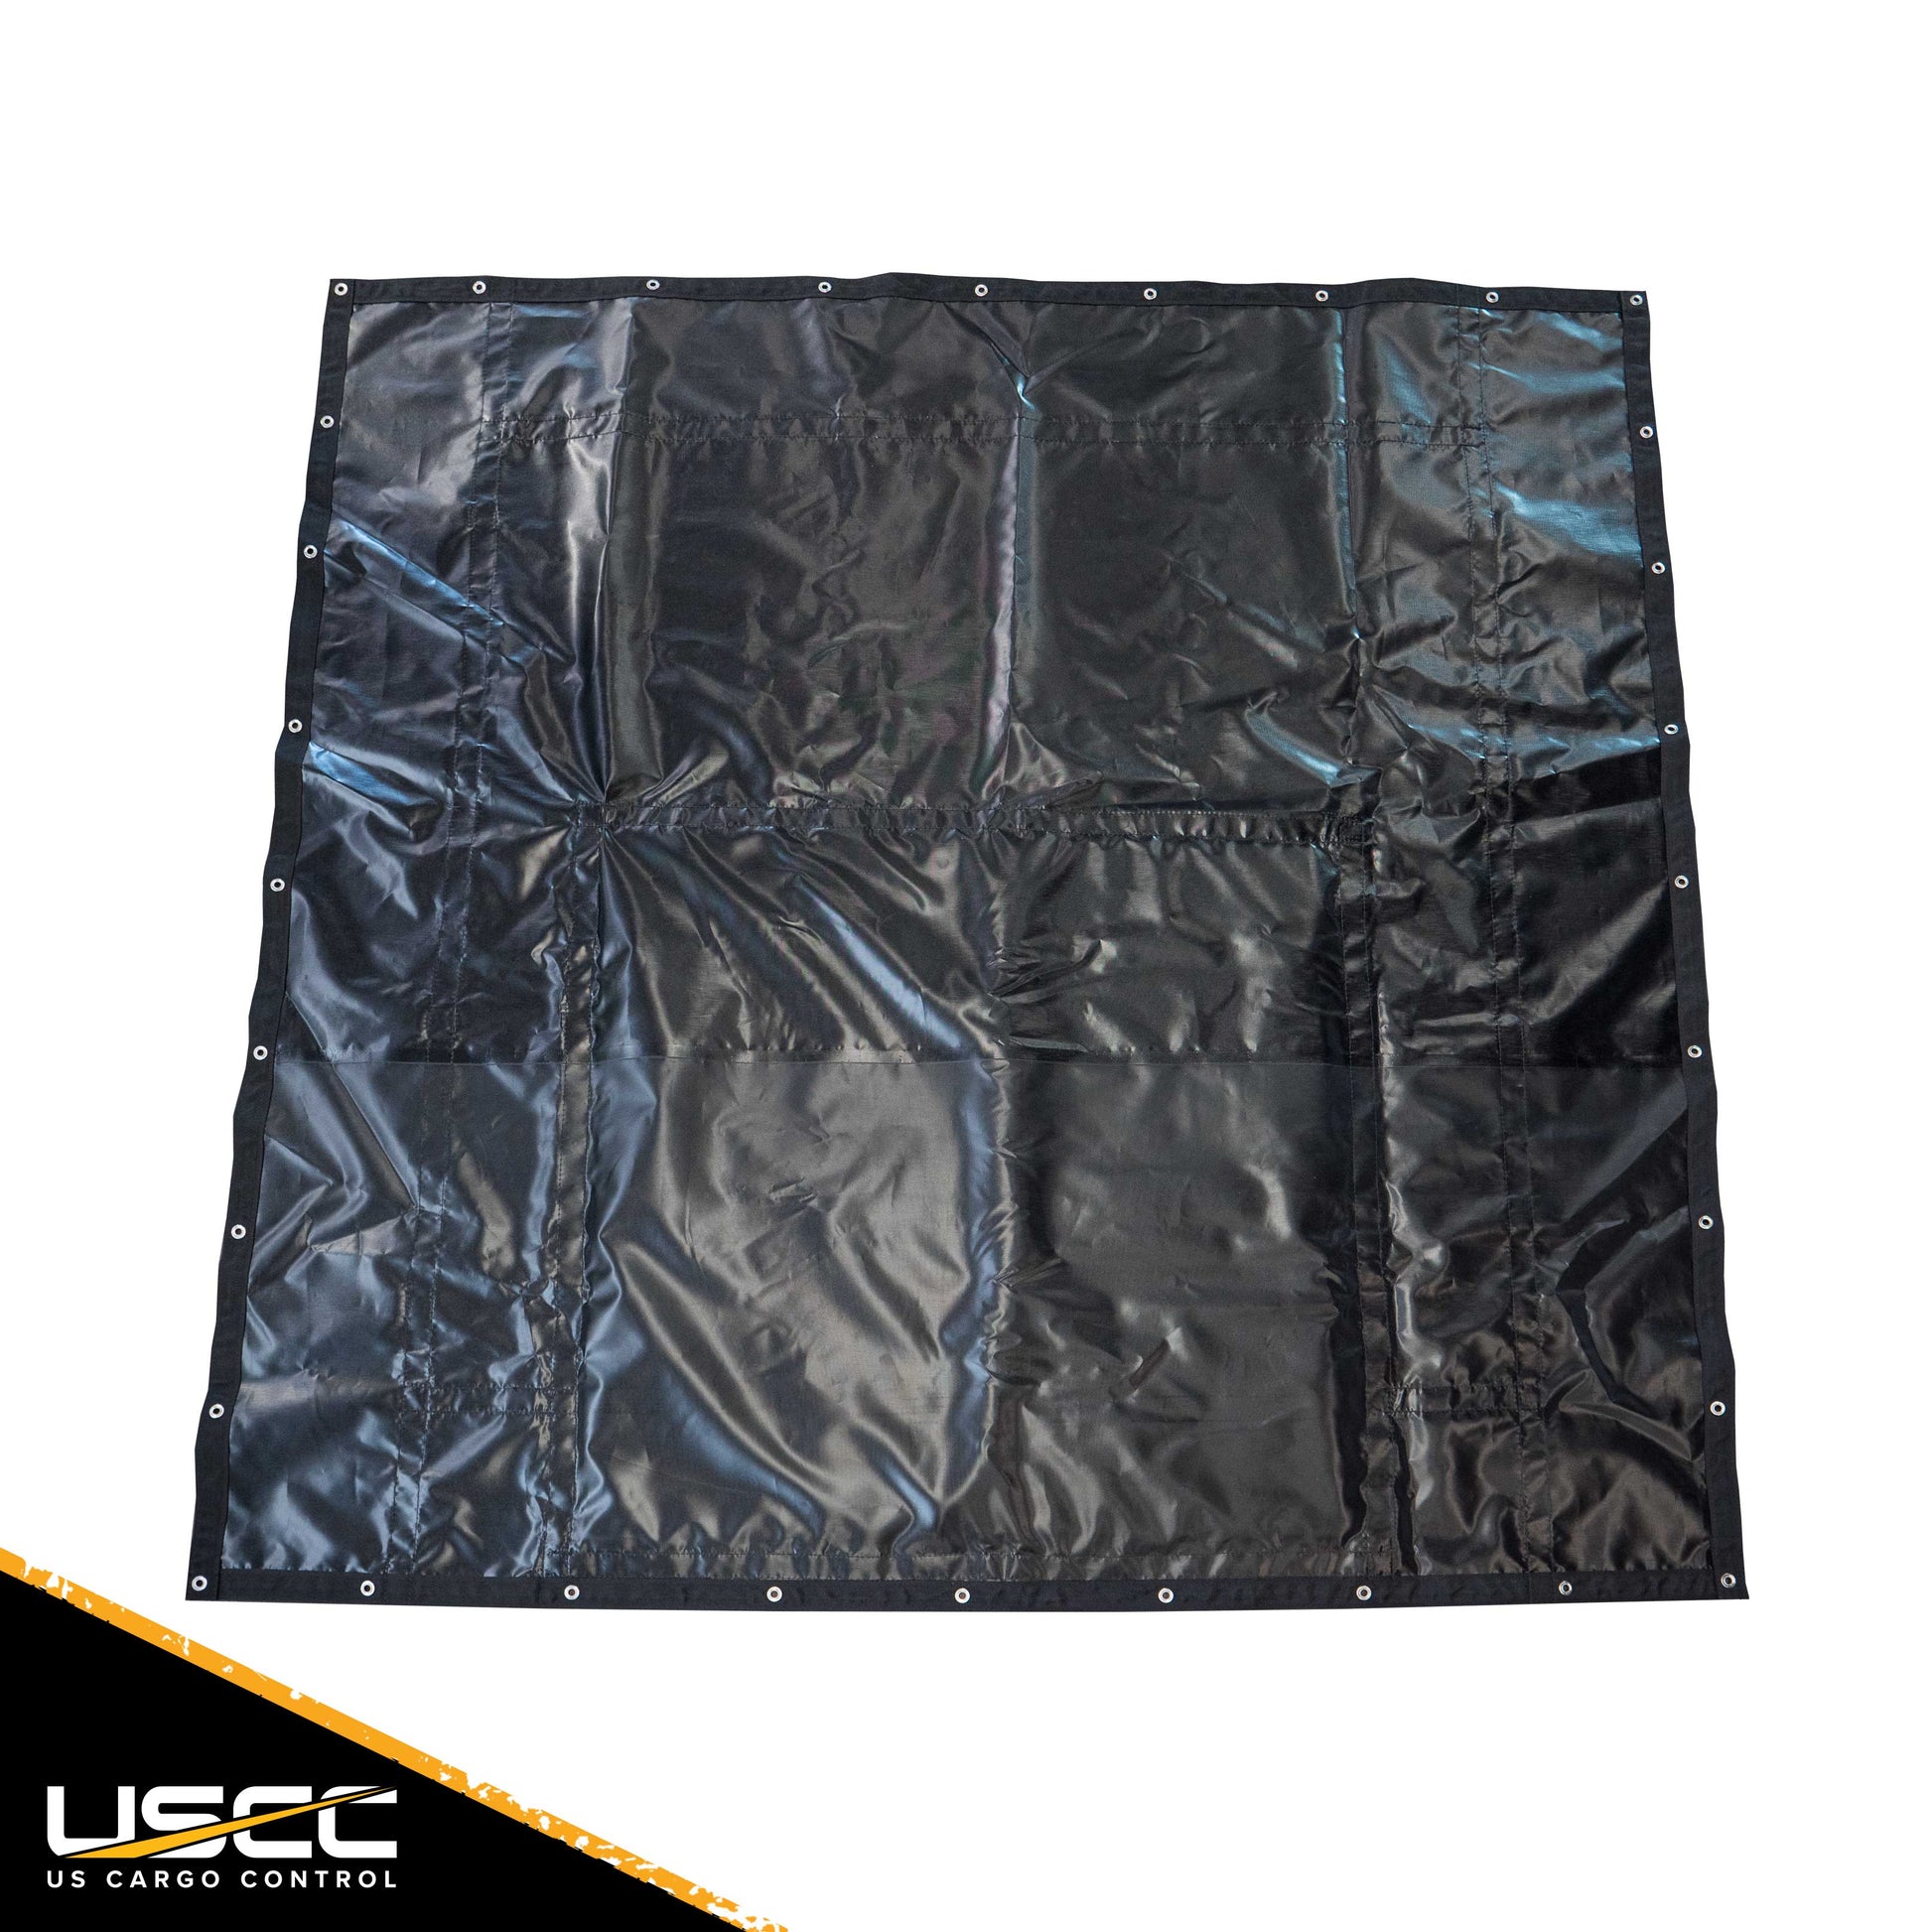 8 foot x 8 foot Windshield Protector Tarp with 4 foot x 4 foot Pad and Grommets image 2 of 9